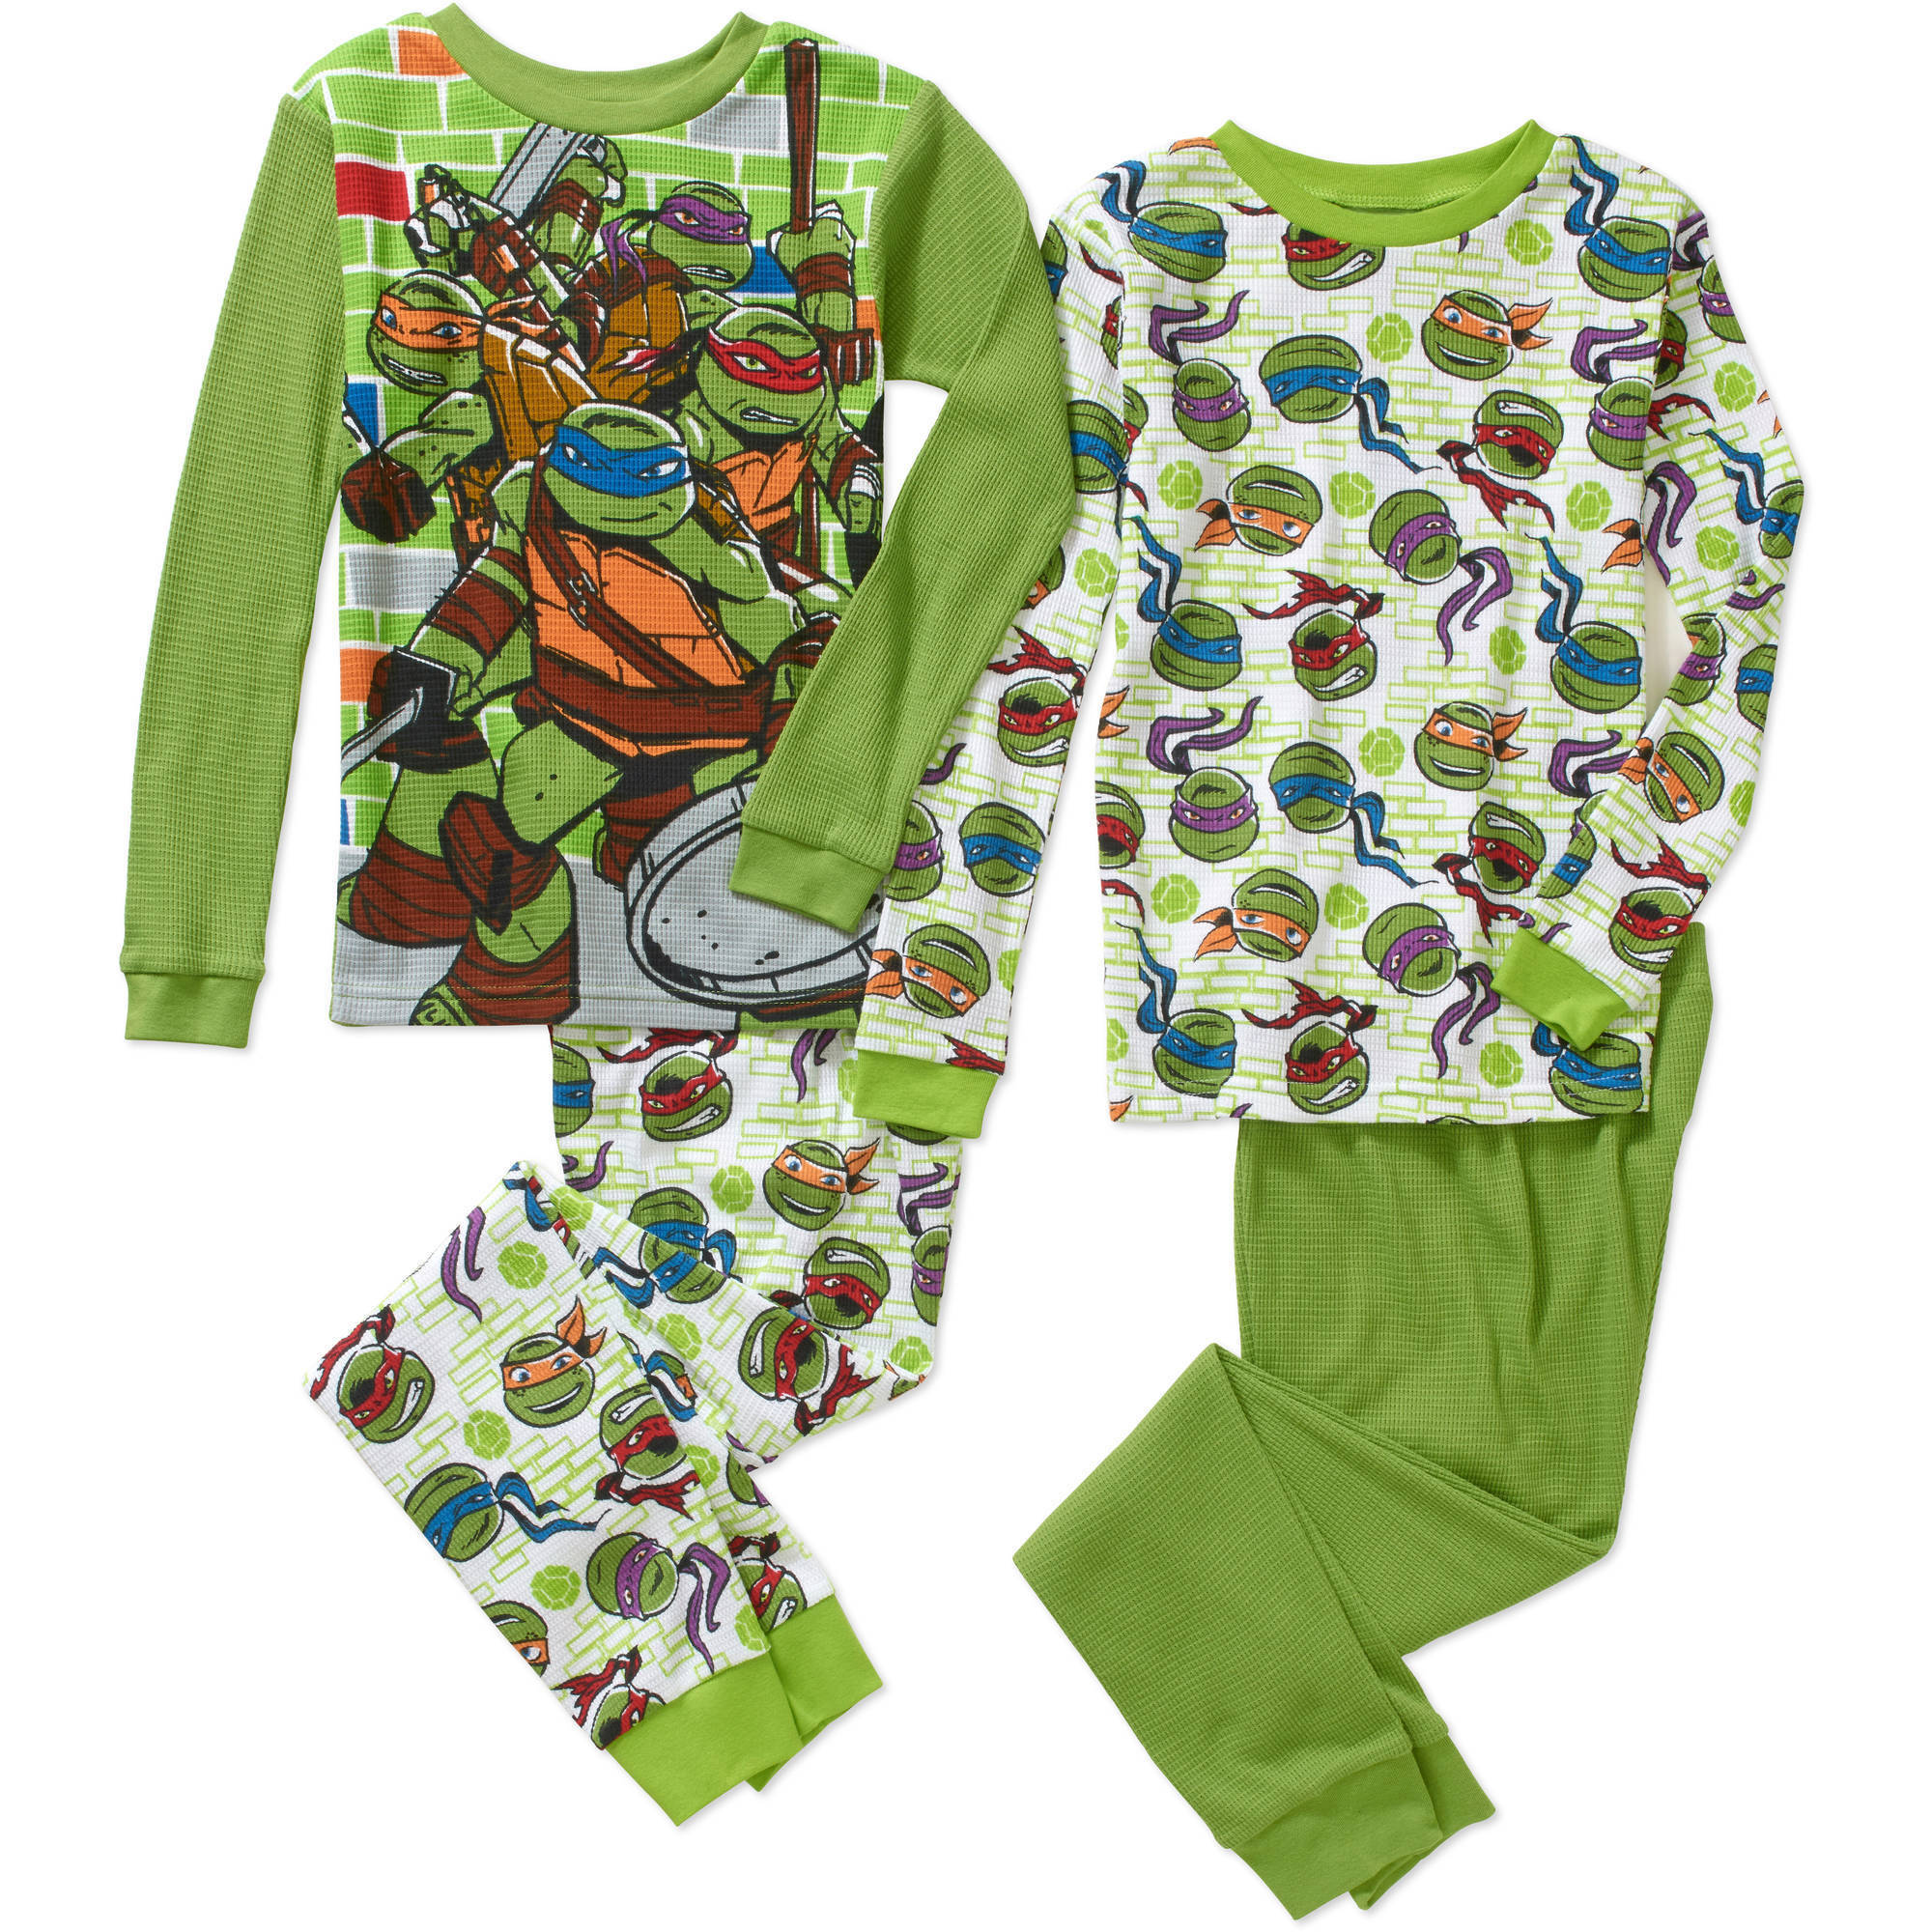 Boys' Licensed 4 Piece Cotton Thermal Set, Available in 4 Characters - image 1 of 1